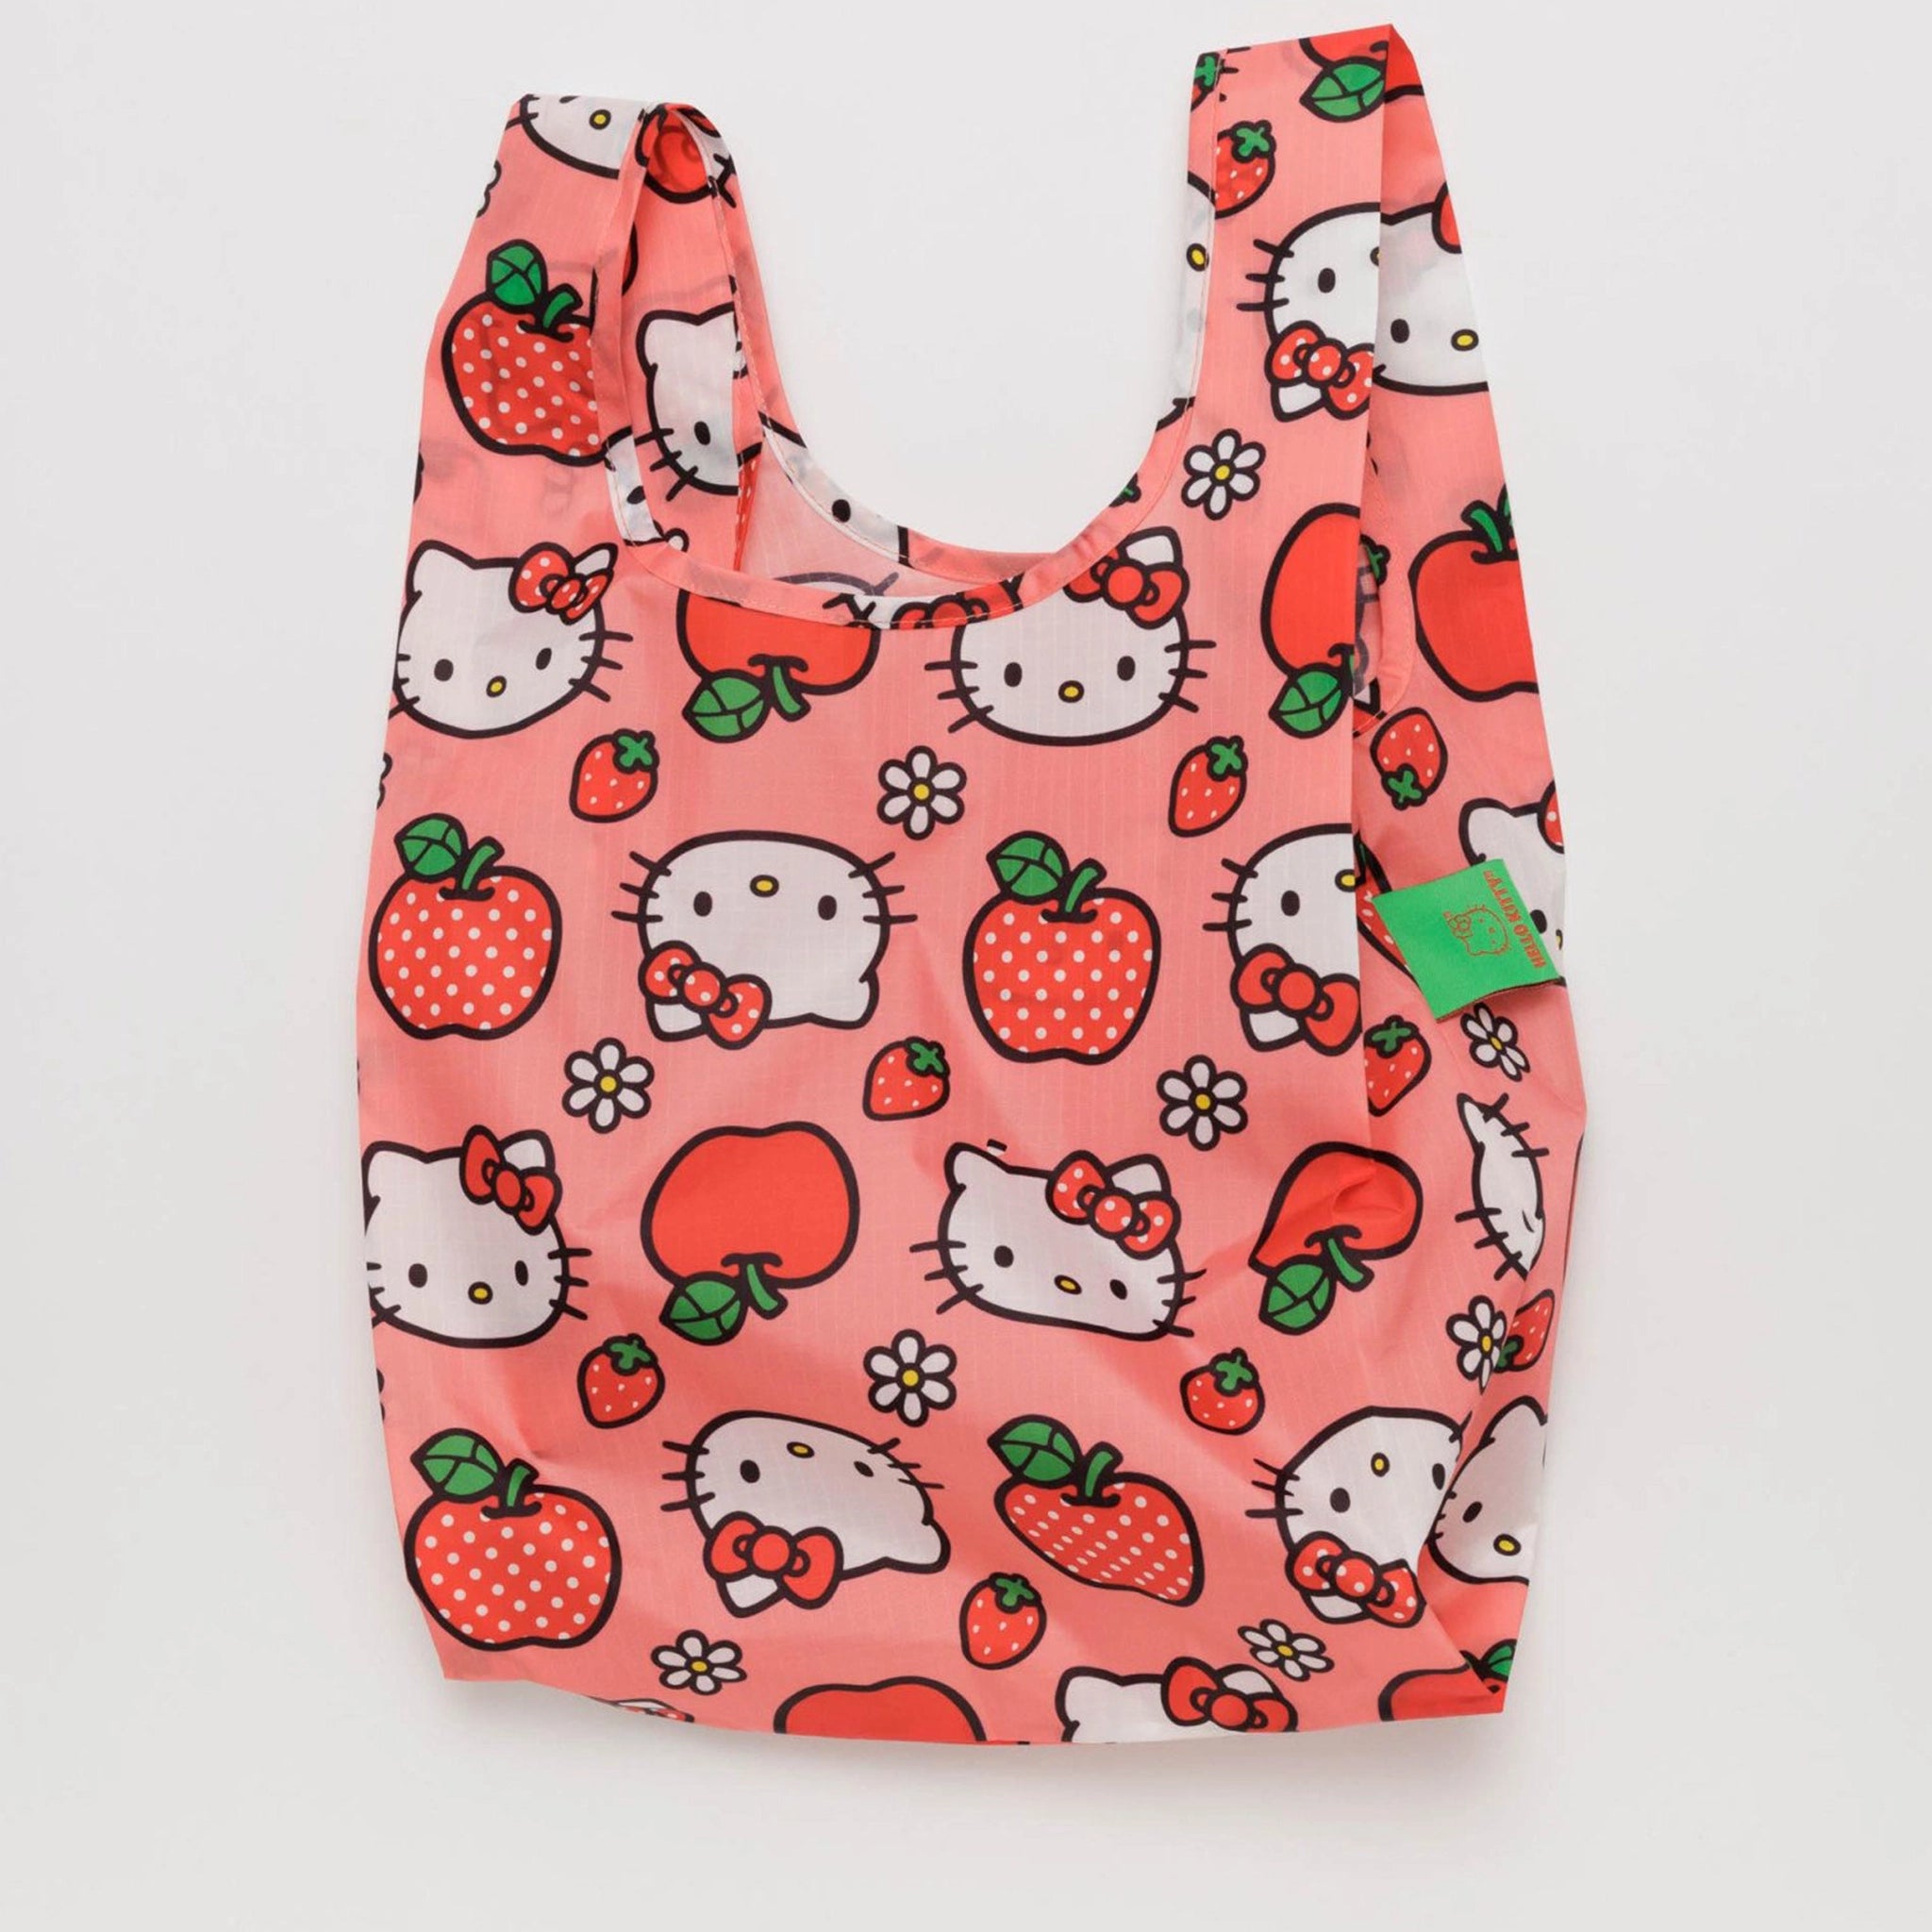 On a white background is a pink nylon bag with hello kitty and apple designs all over. 